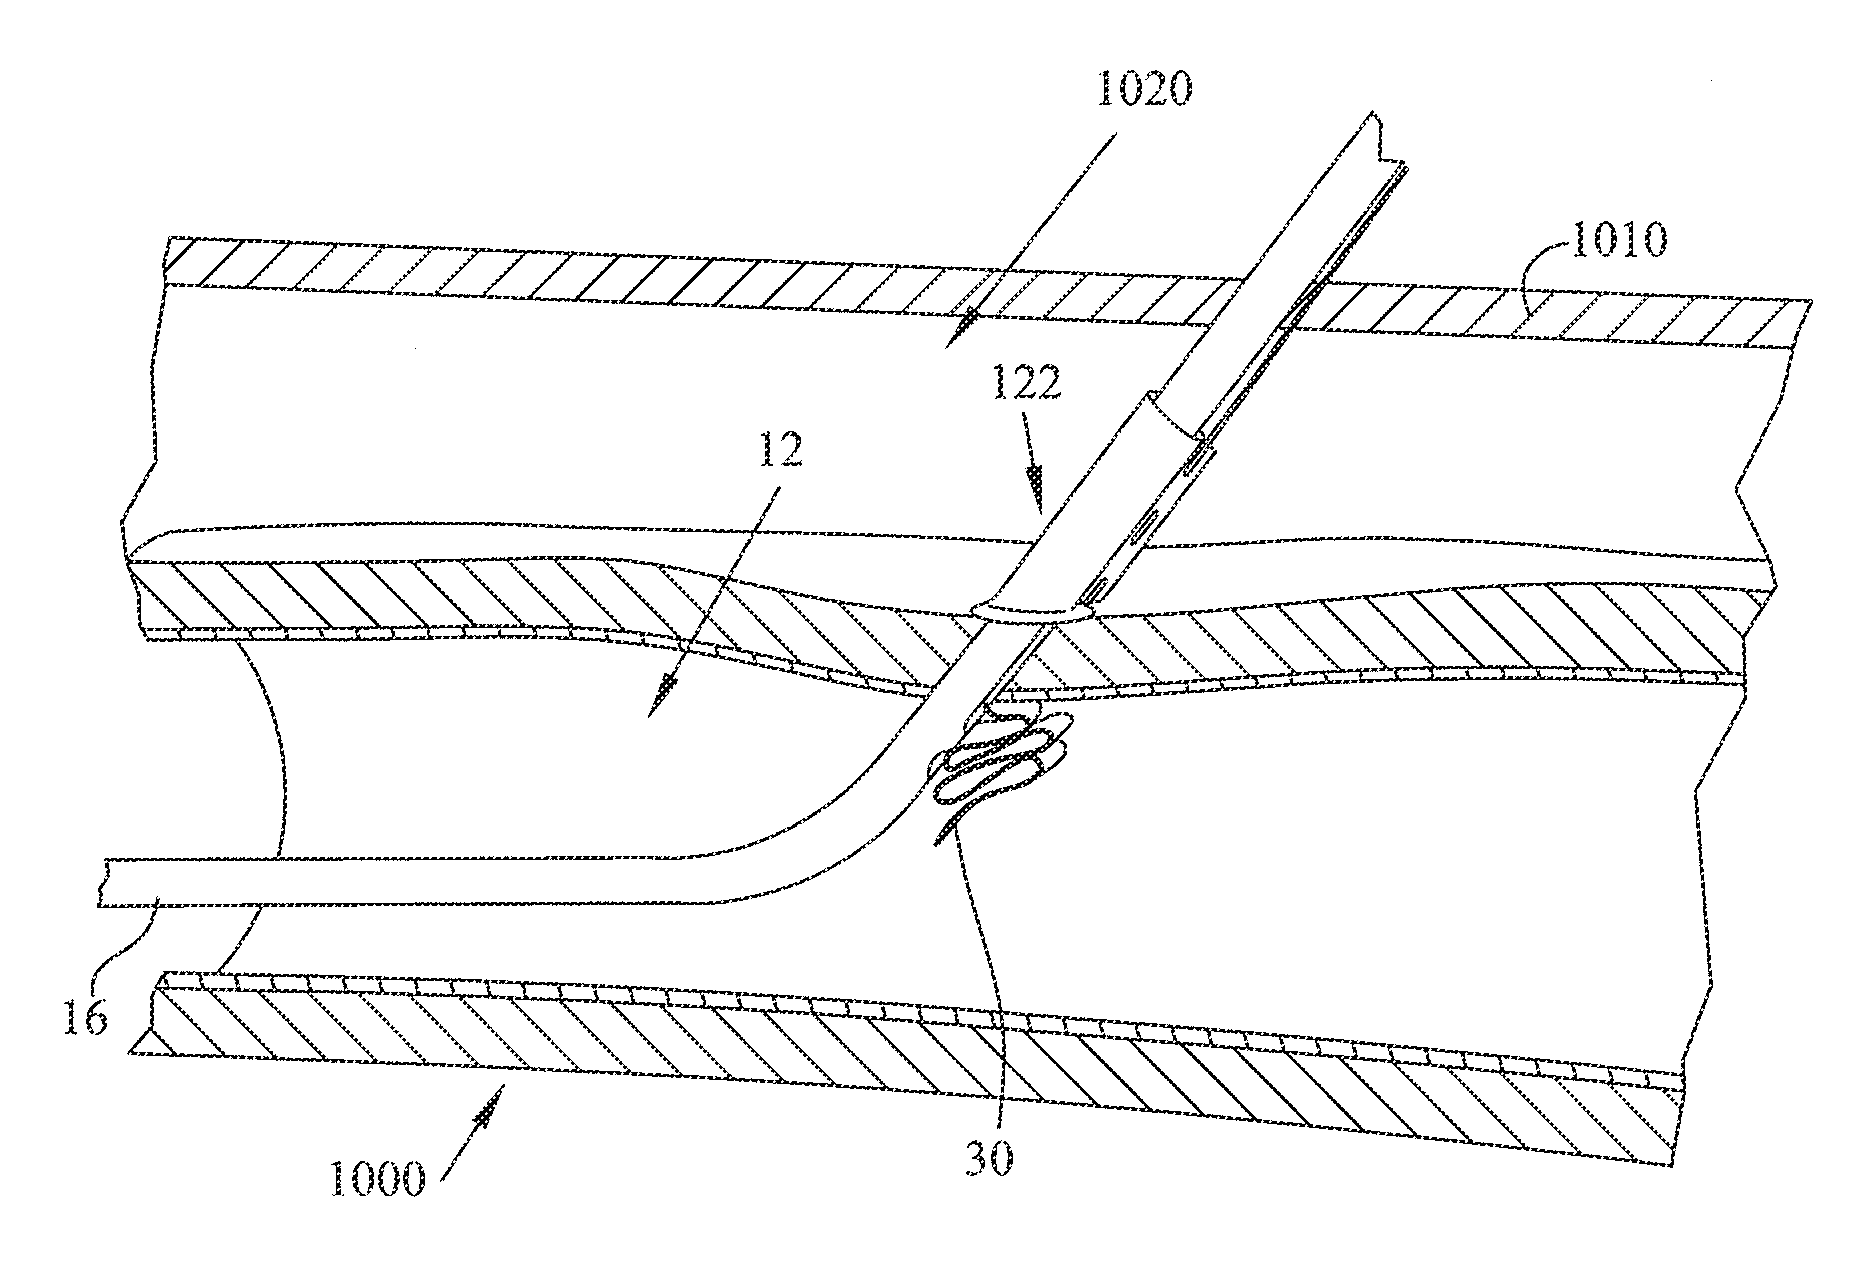 Method and apparatus for sealing access with an Anti-inflammatory infused member